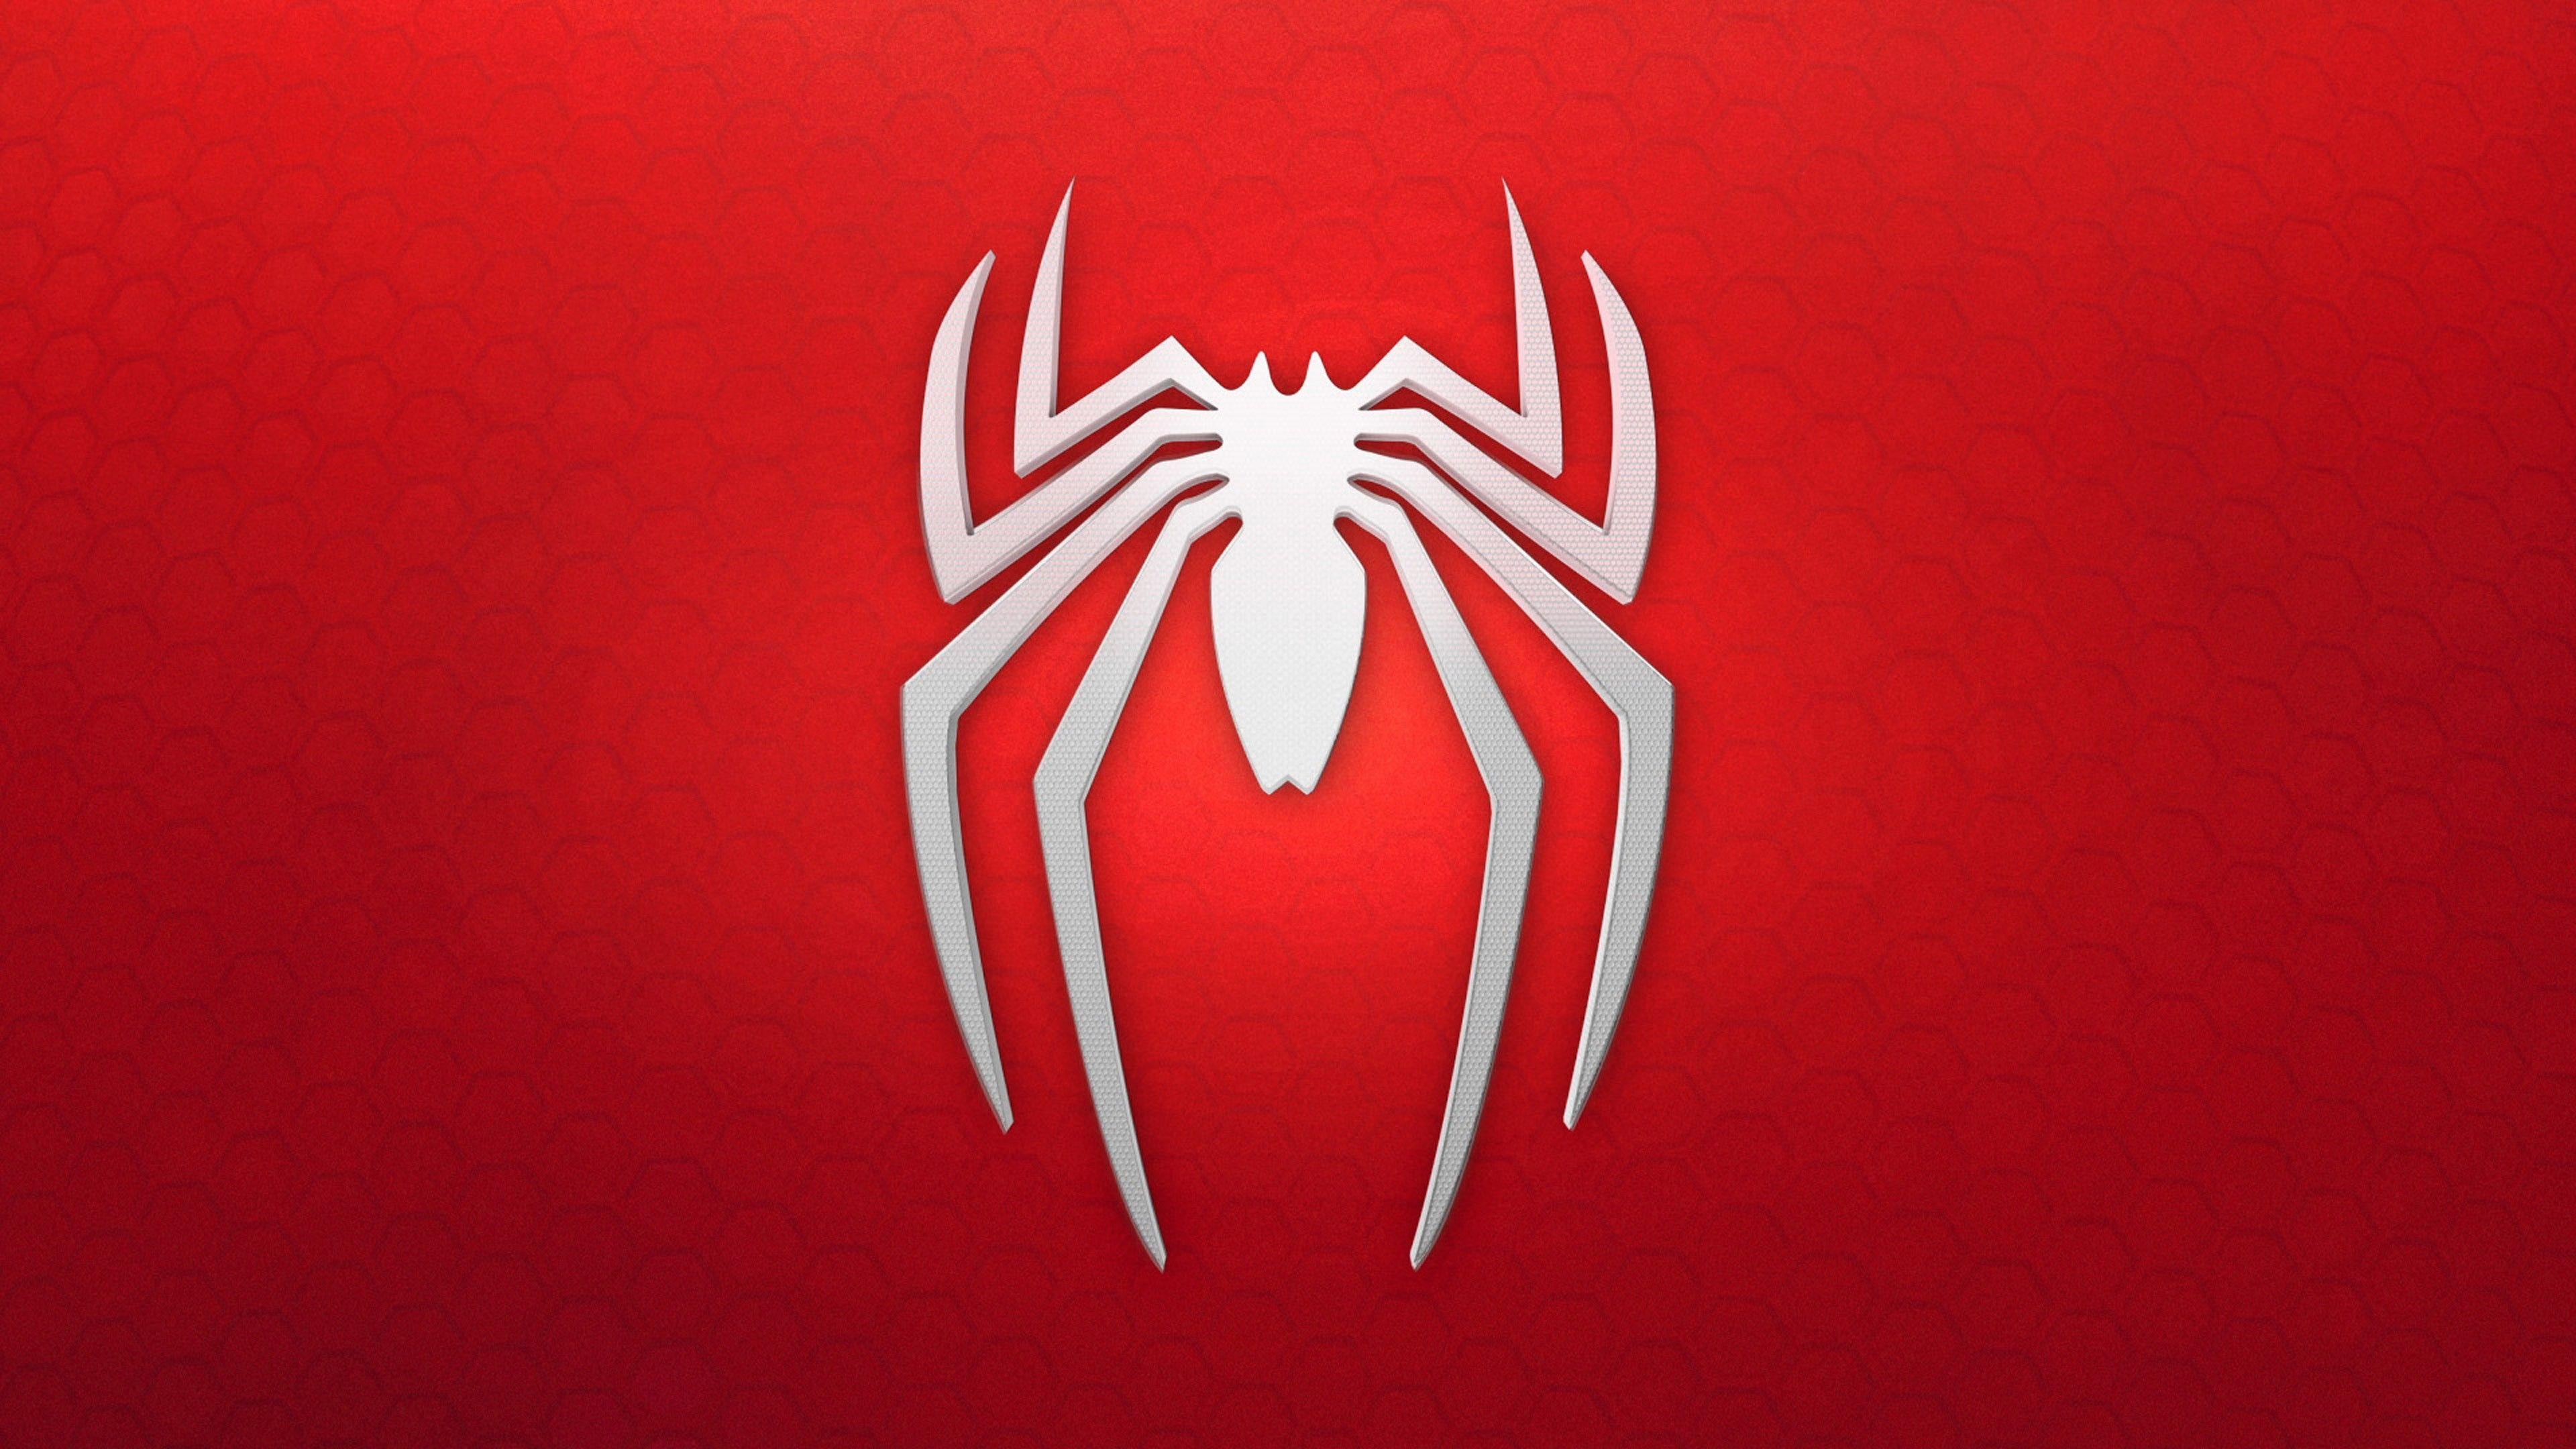 White with Red Background Logo - Wallpaper spiderman, logo, background, red, white, Games #11596